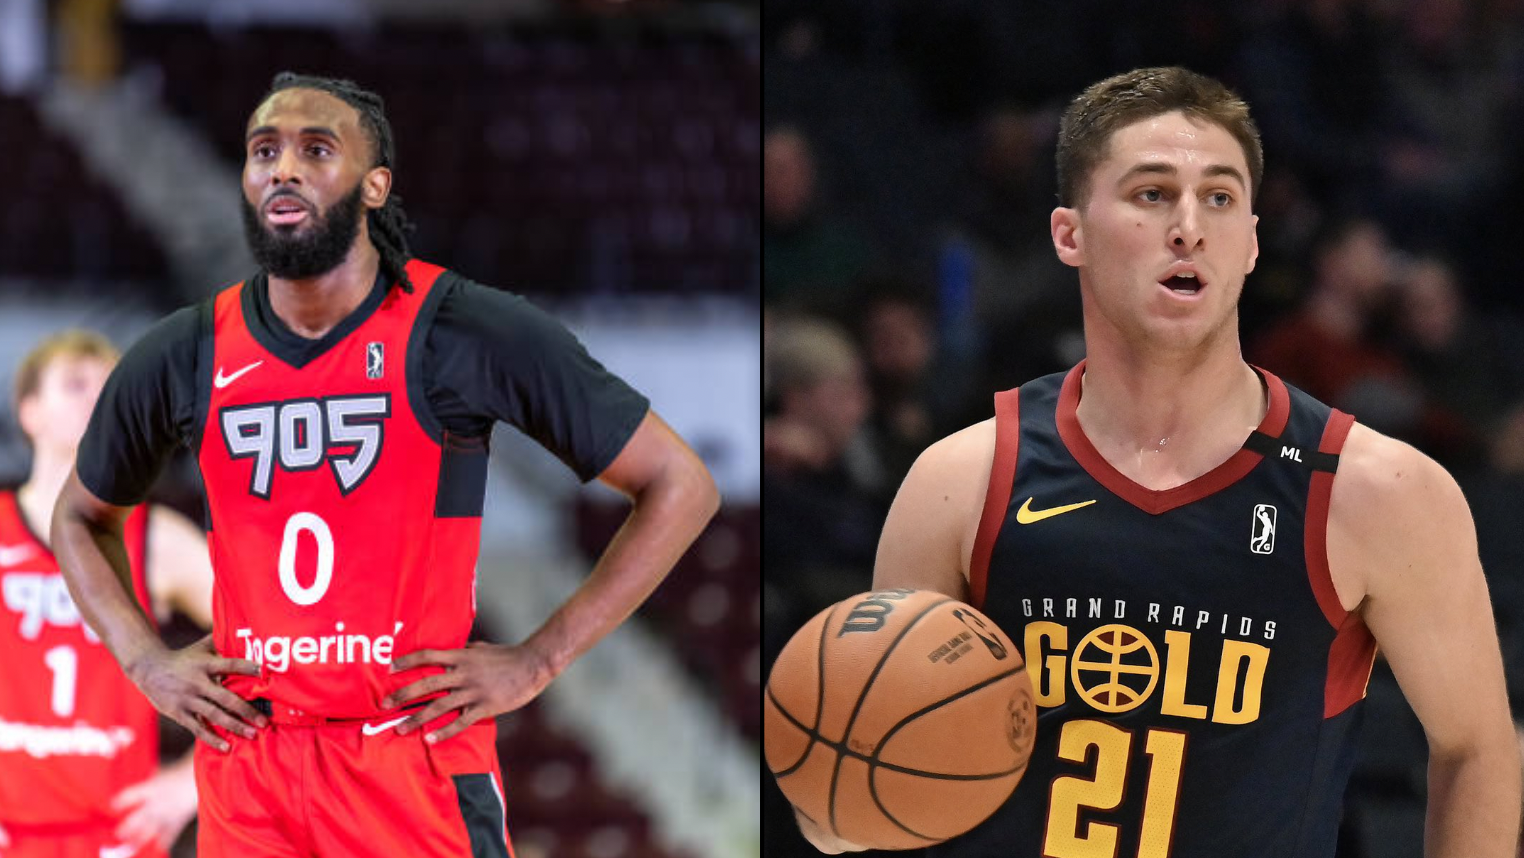 Fantastic Freeman-Liberty performance not enough as Raptors 905 lose on school day to Grand Rapids Gold